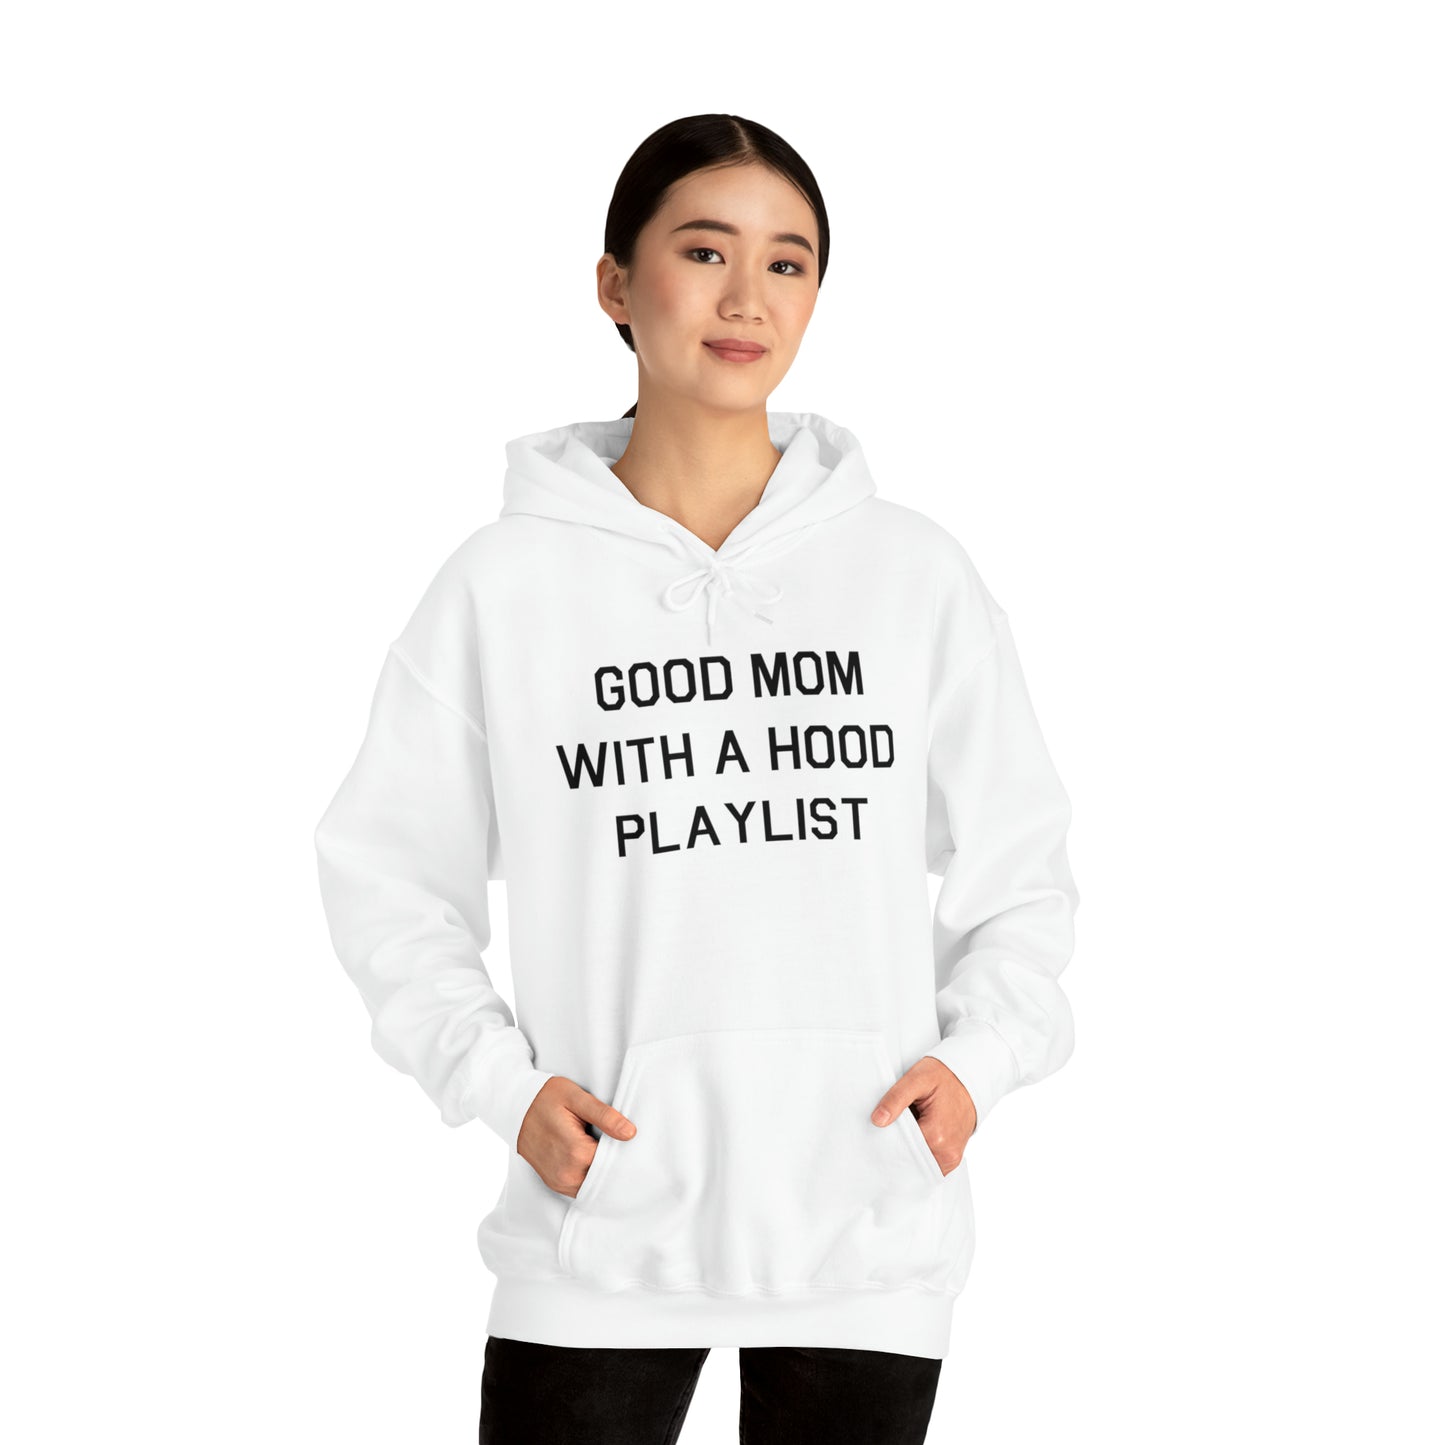 Good Mom With a Hood Playlist Hoodie Great Gift for a Good Mom With a Hood Playlist Sweatshirt